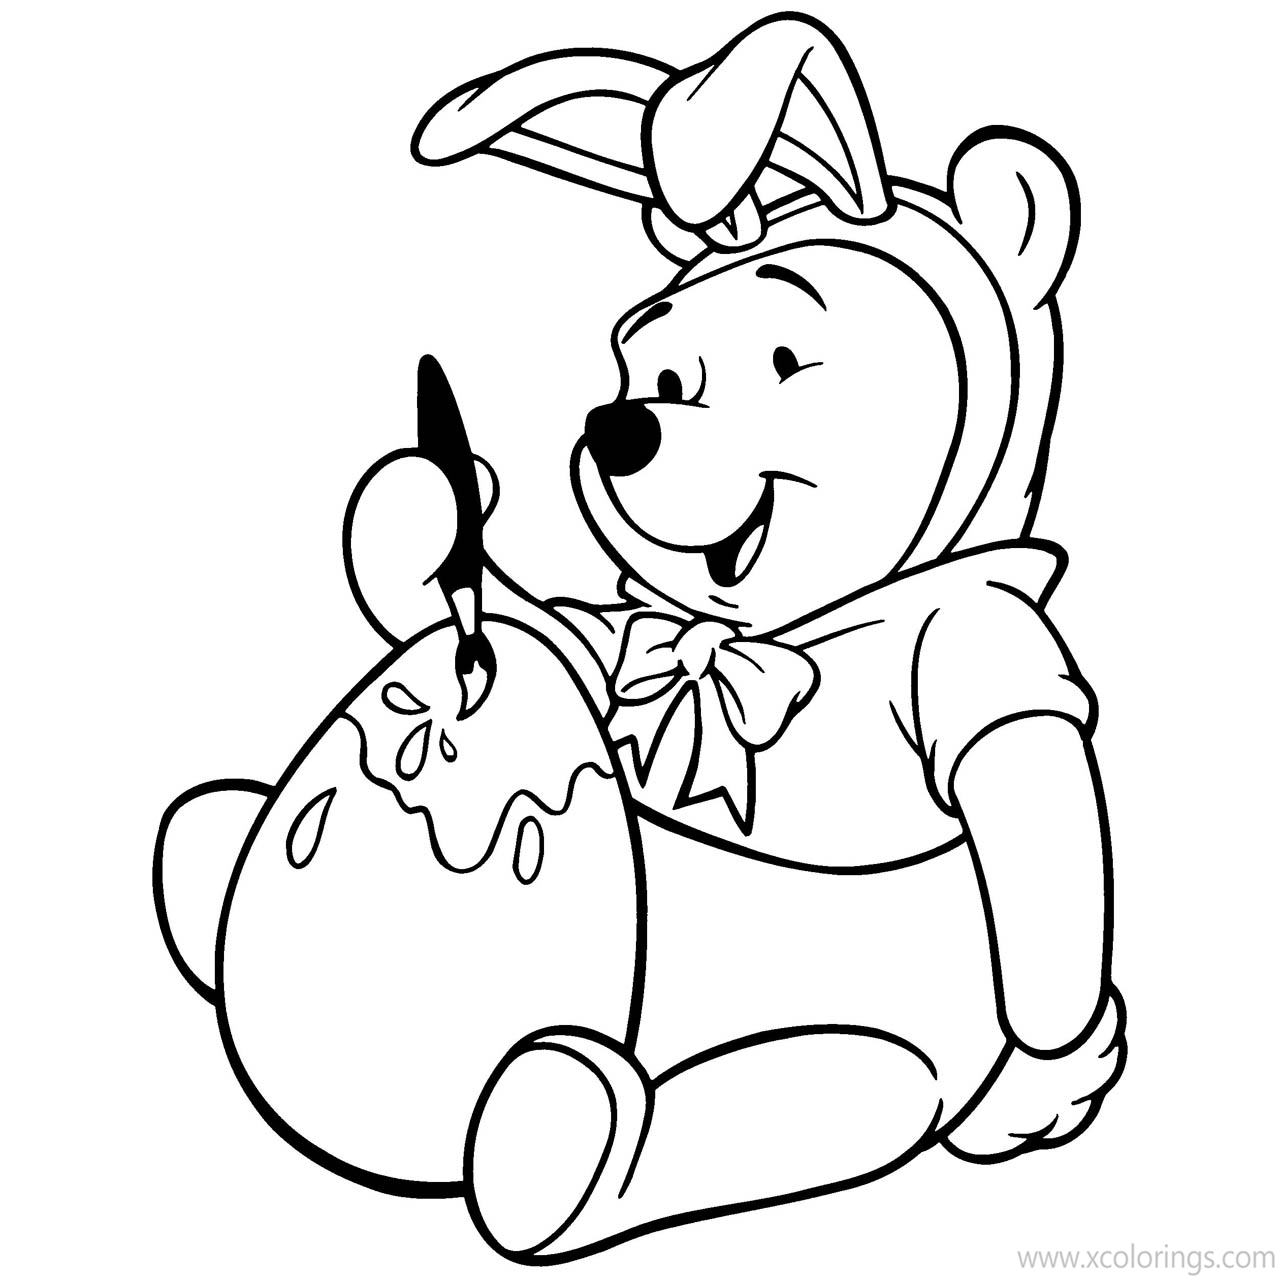 Free Disney Winnie The Pooh Easter Coloring Pages Painting A Easter Egg printable